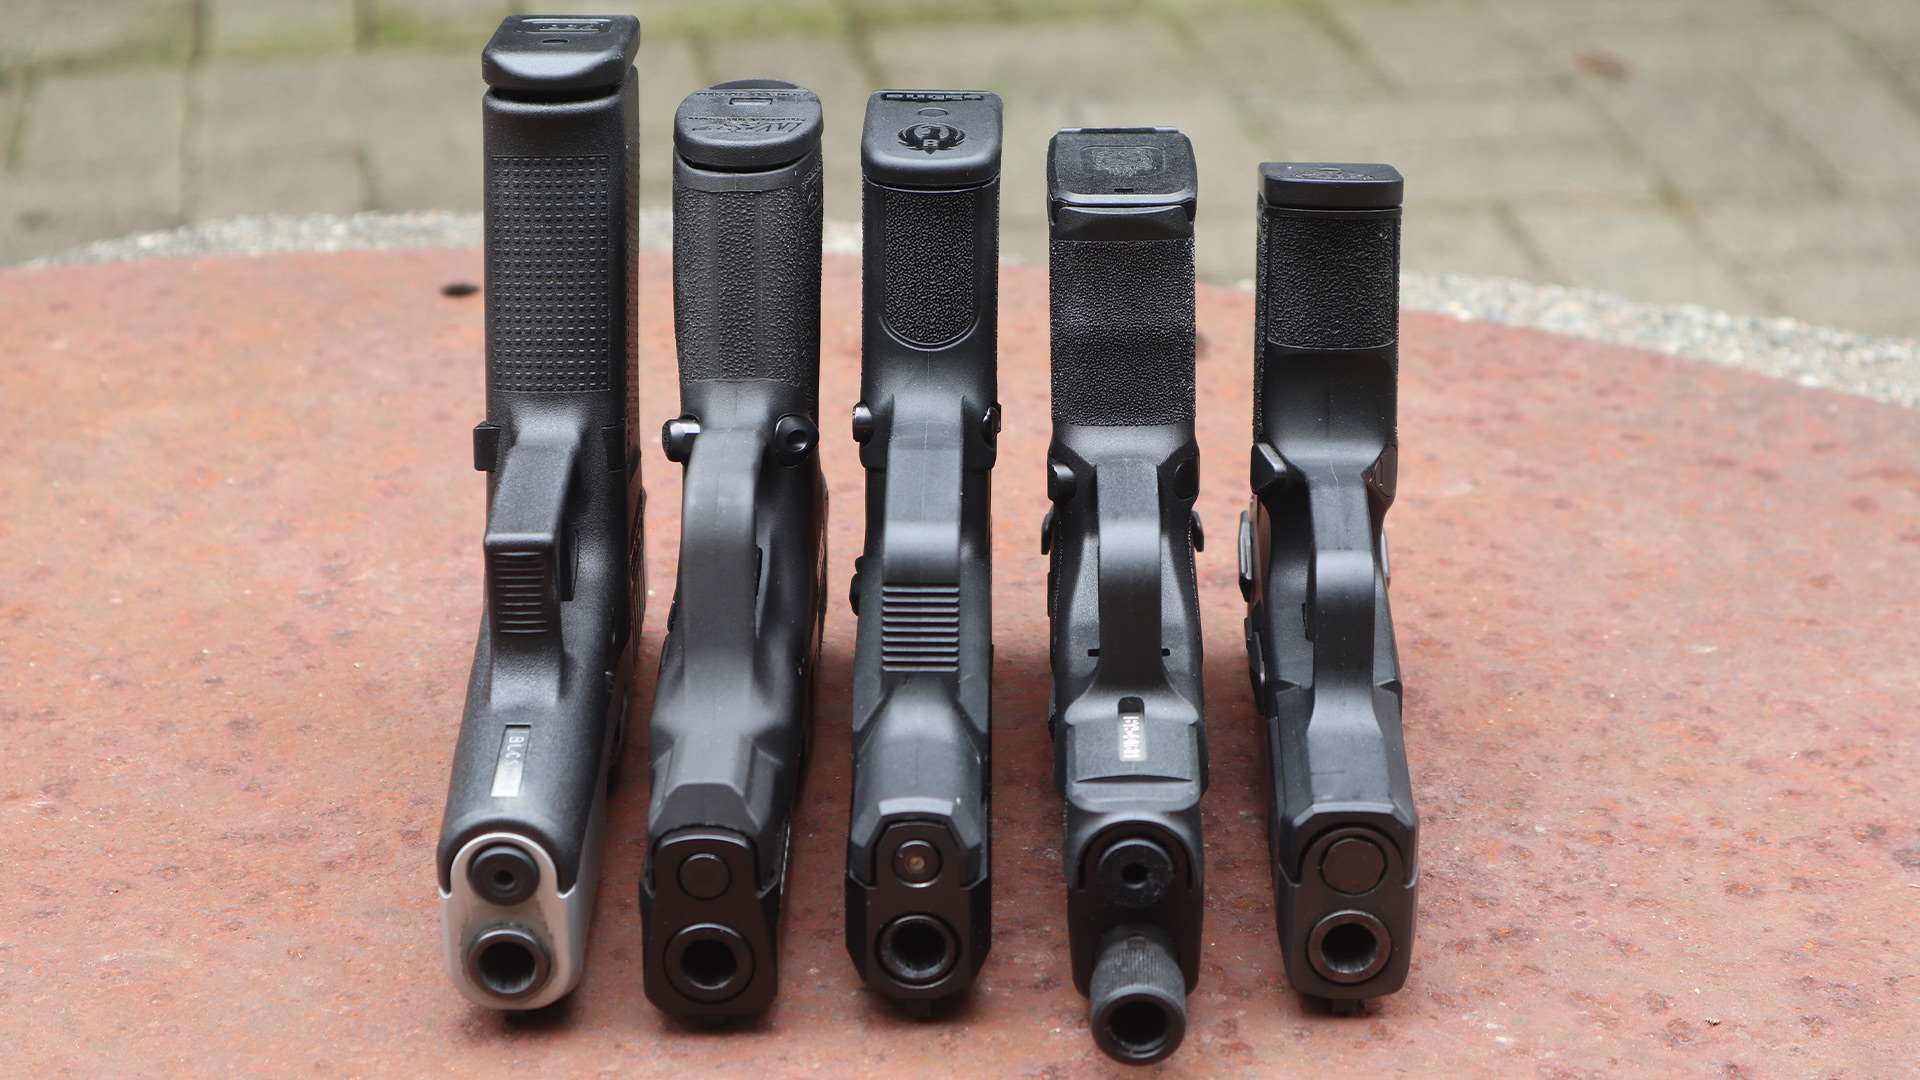 Front view of pistols